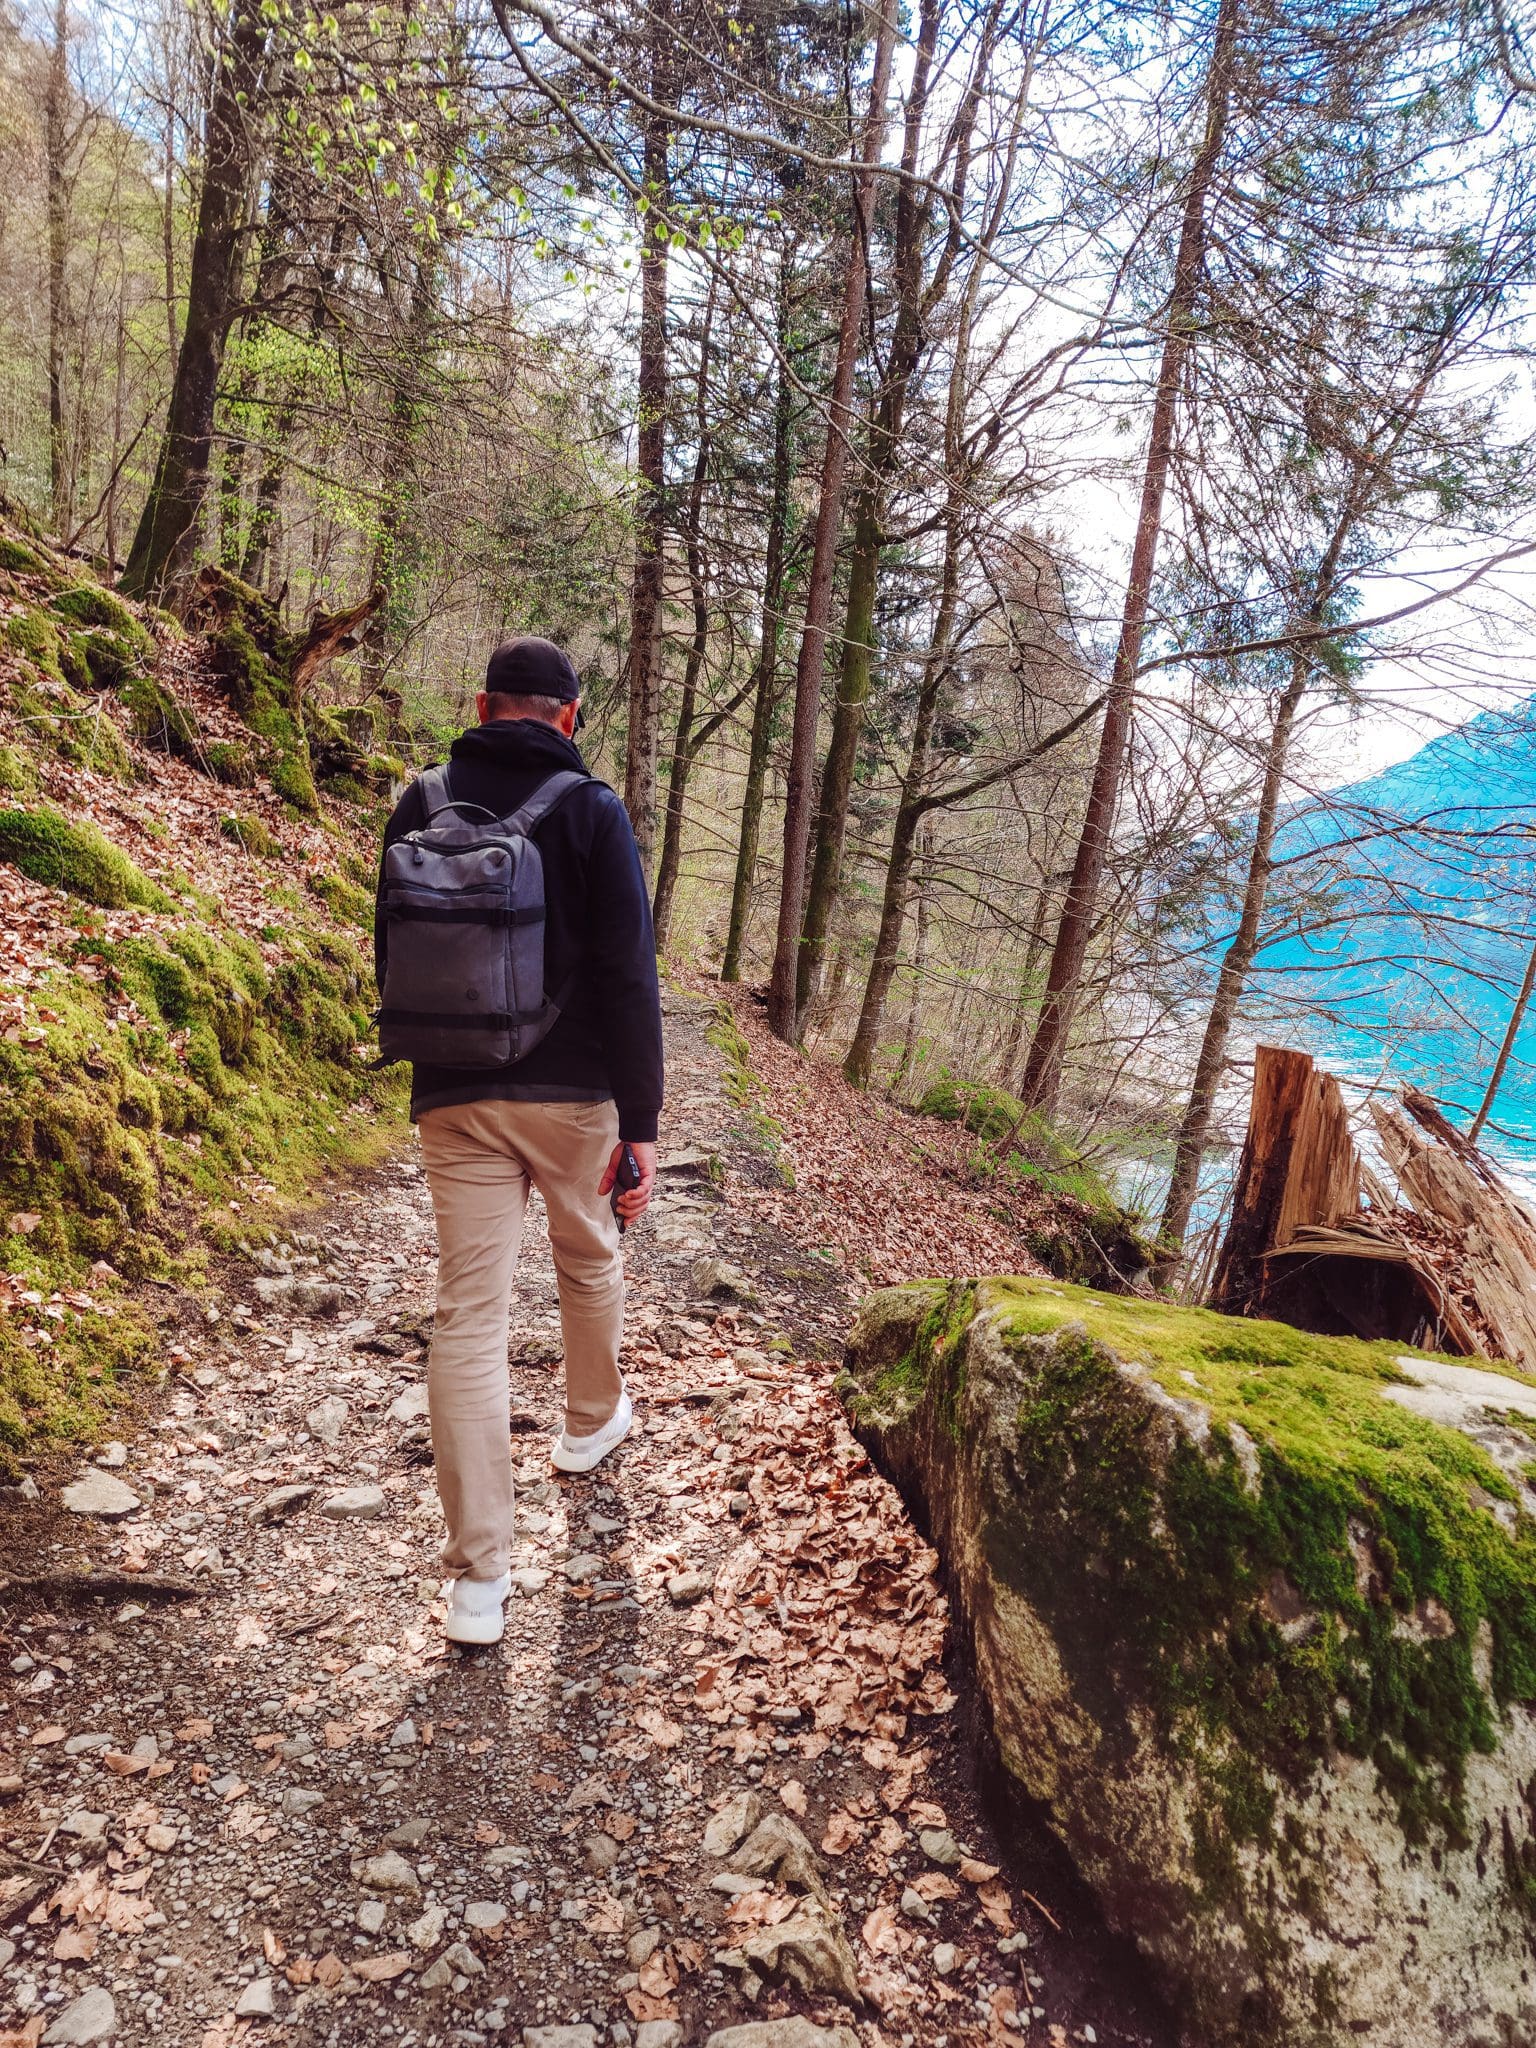 Mike on our hike along Lake Brienz